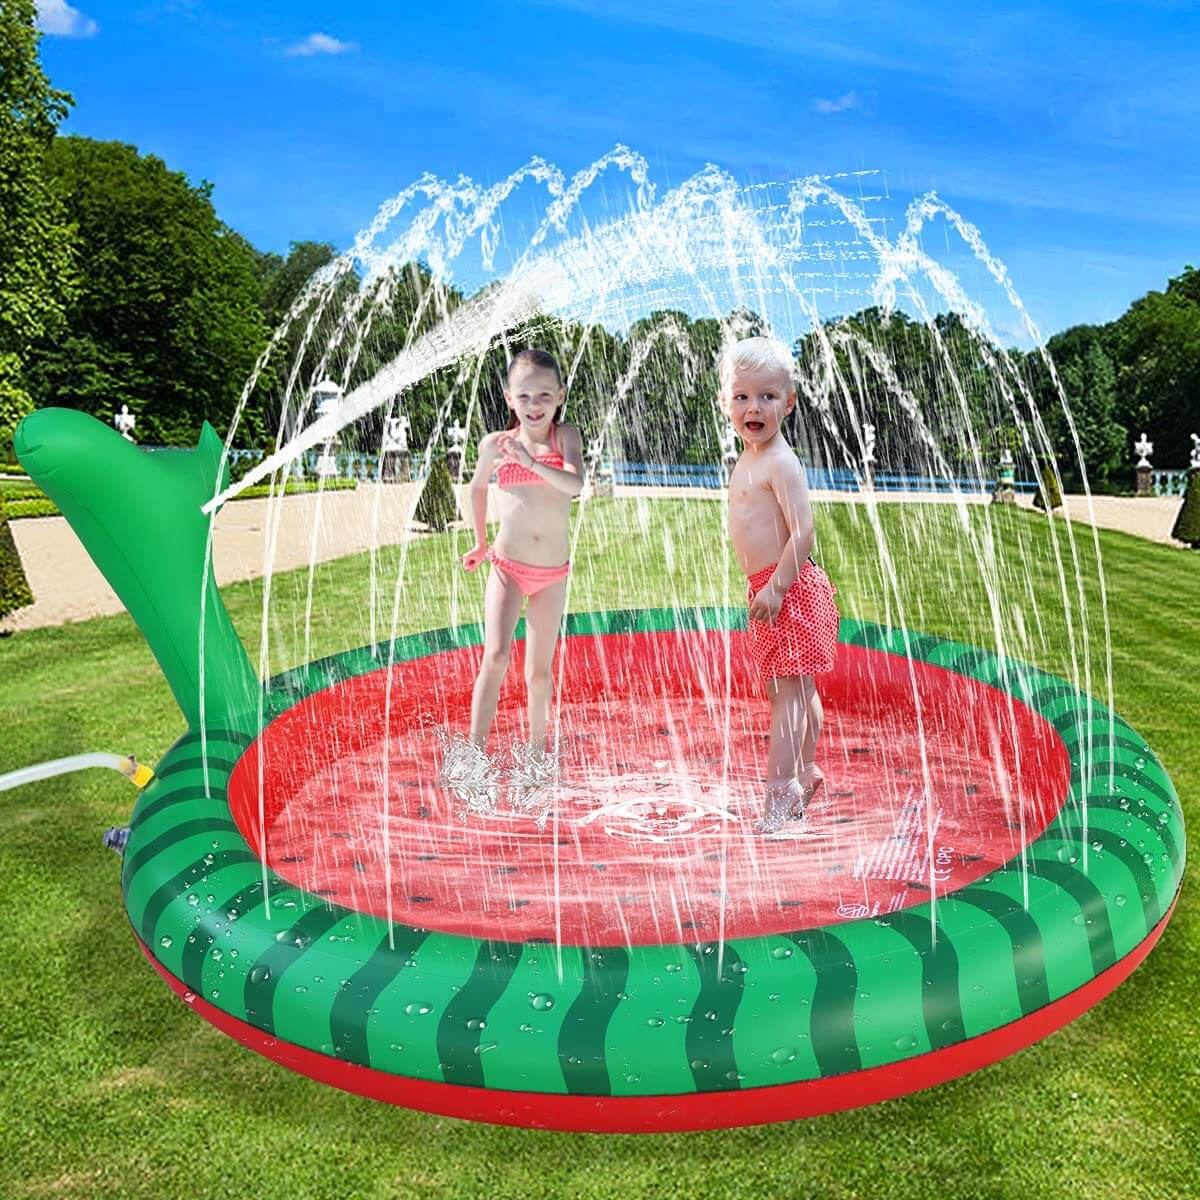 10 Awesome Backyard Water Toys for Kids